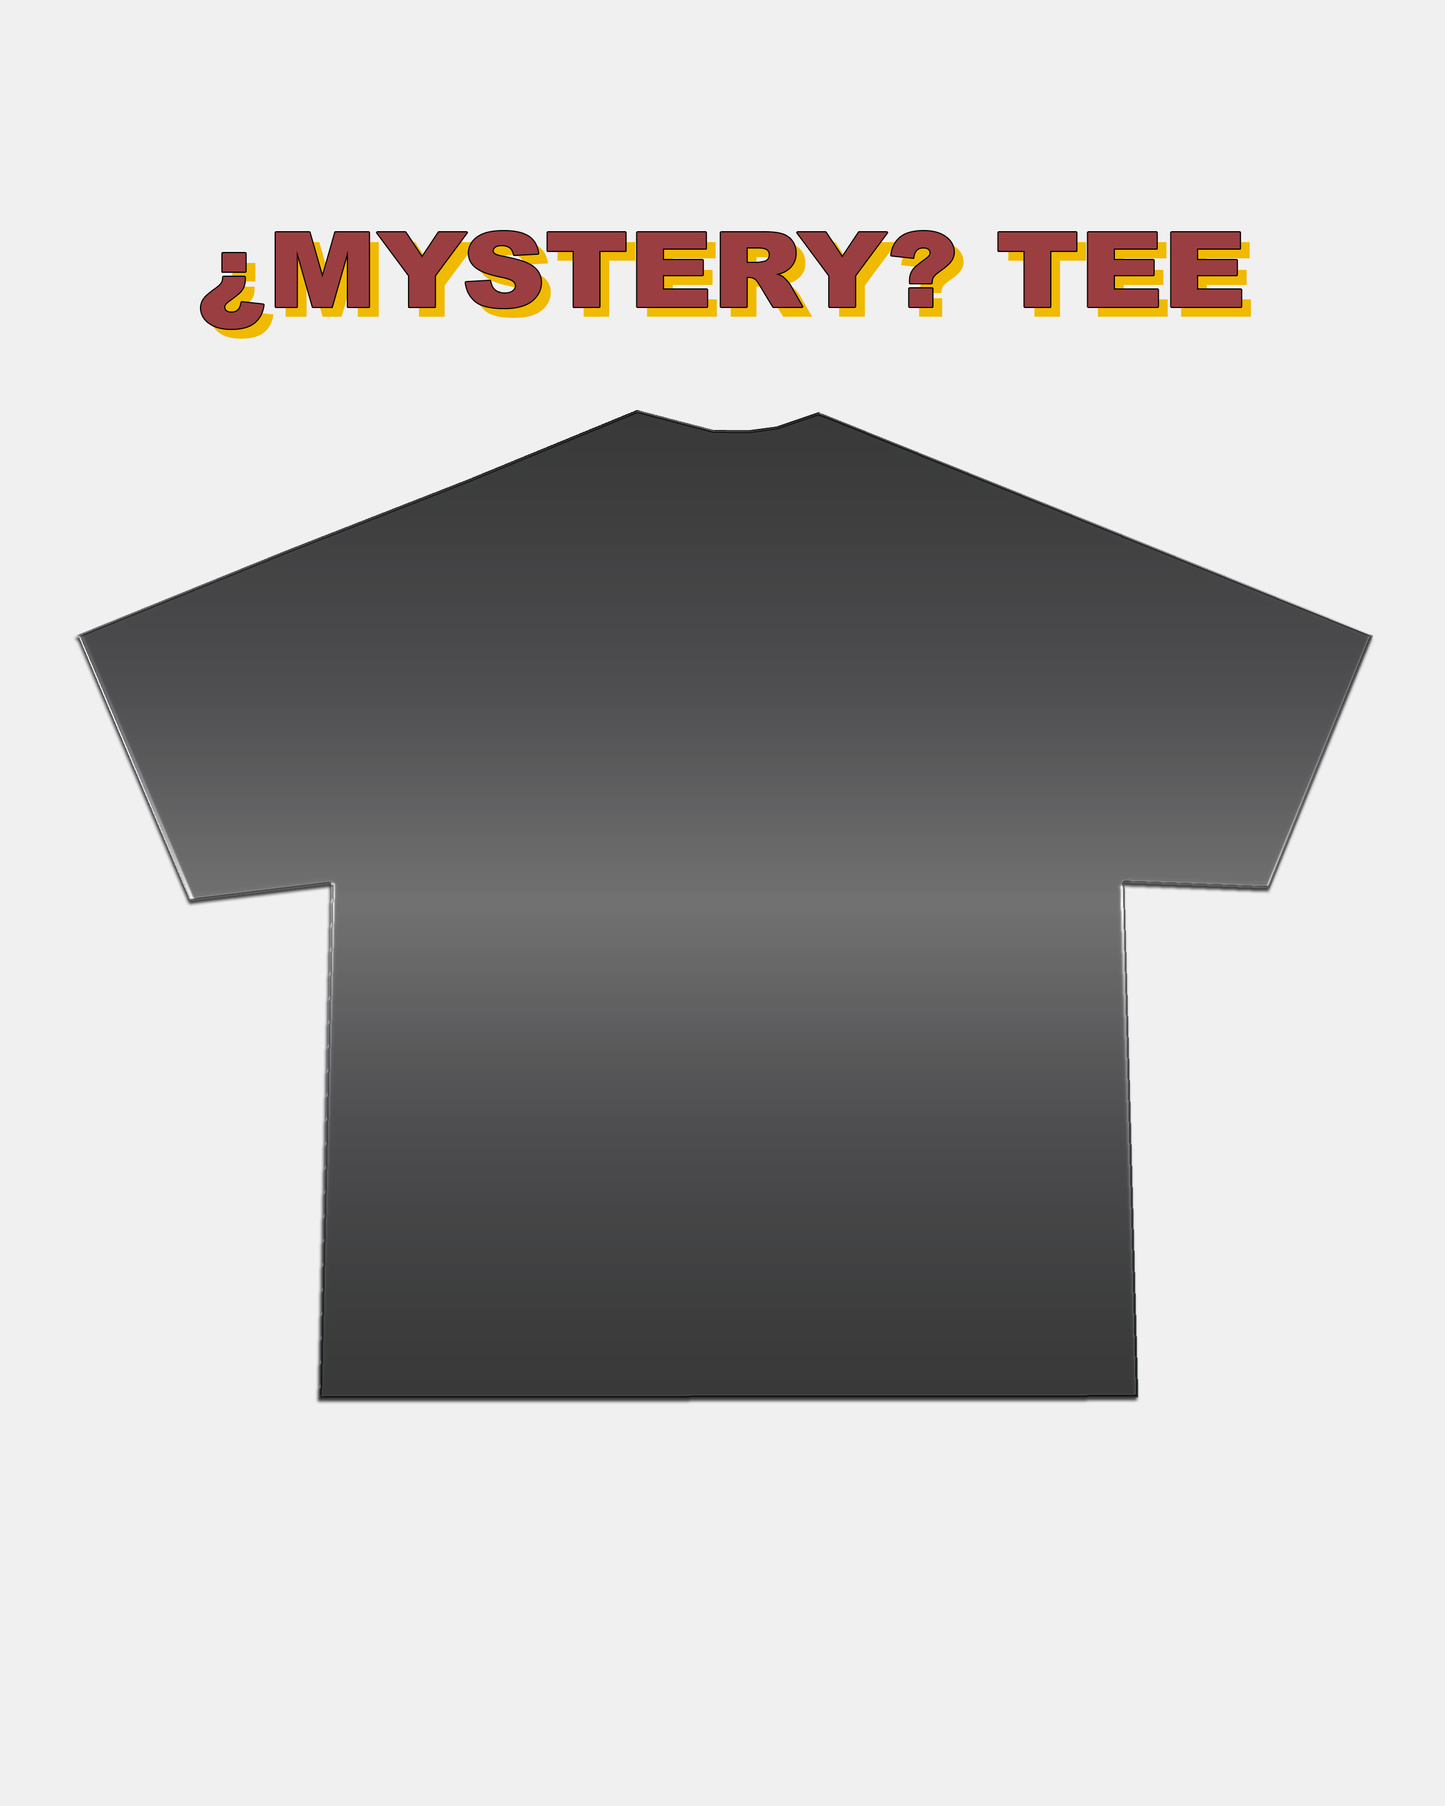 ¿MYSTERY? TEE - [FINAL SALE / NO EXCHANGES]